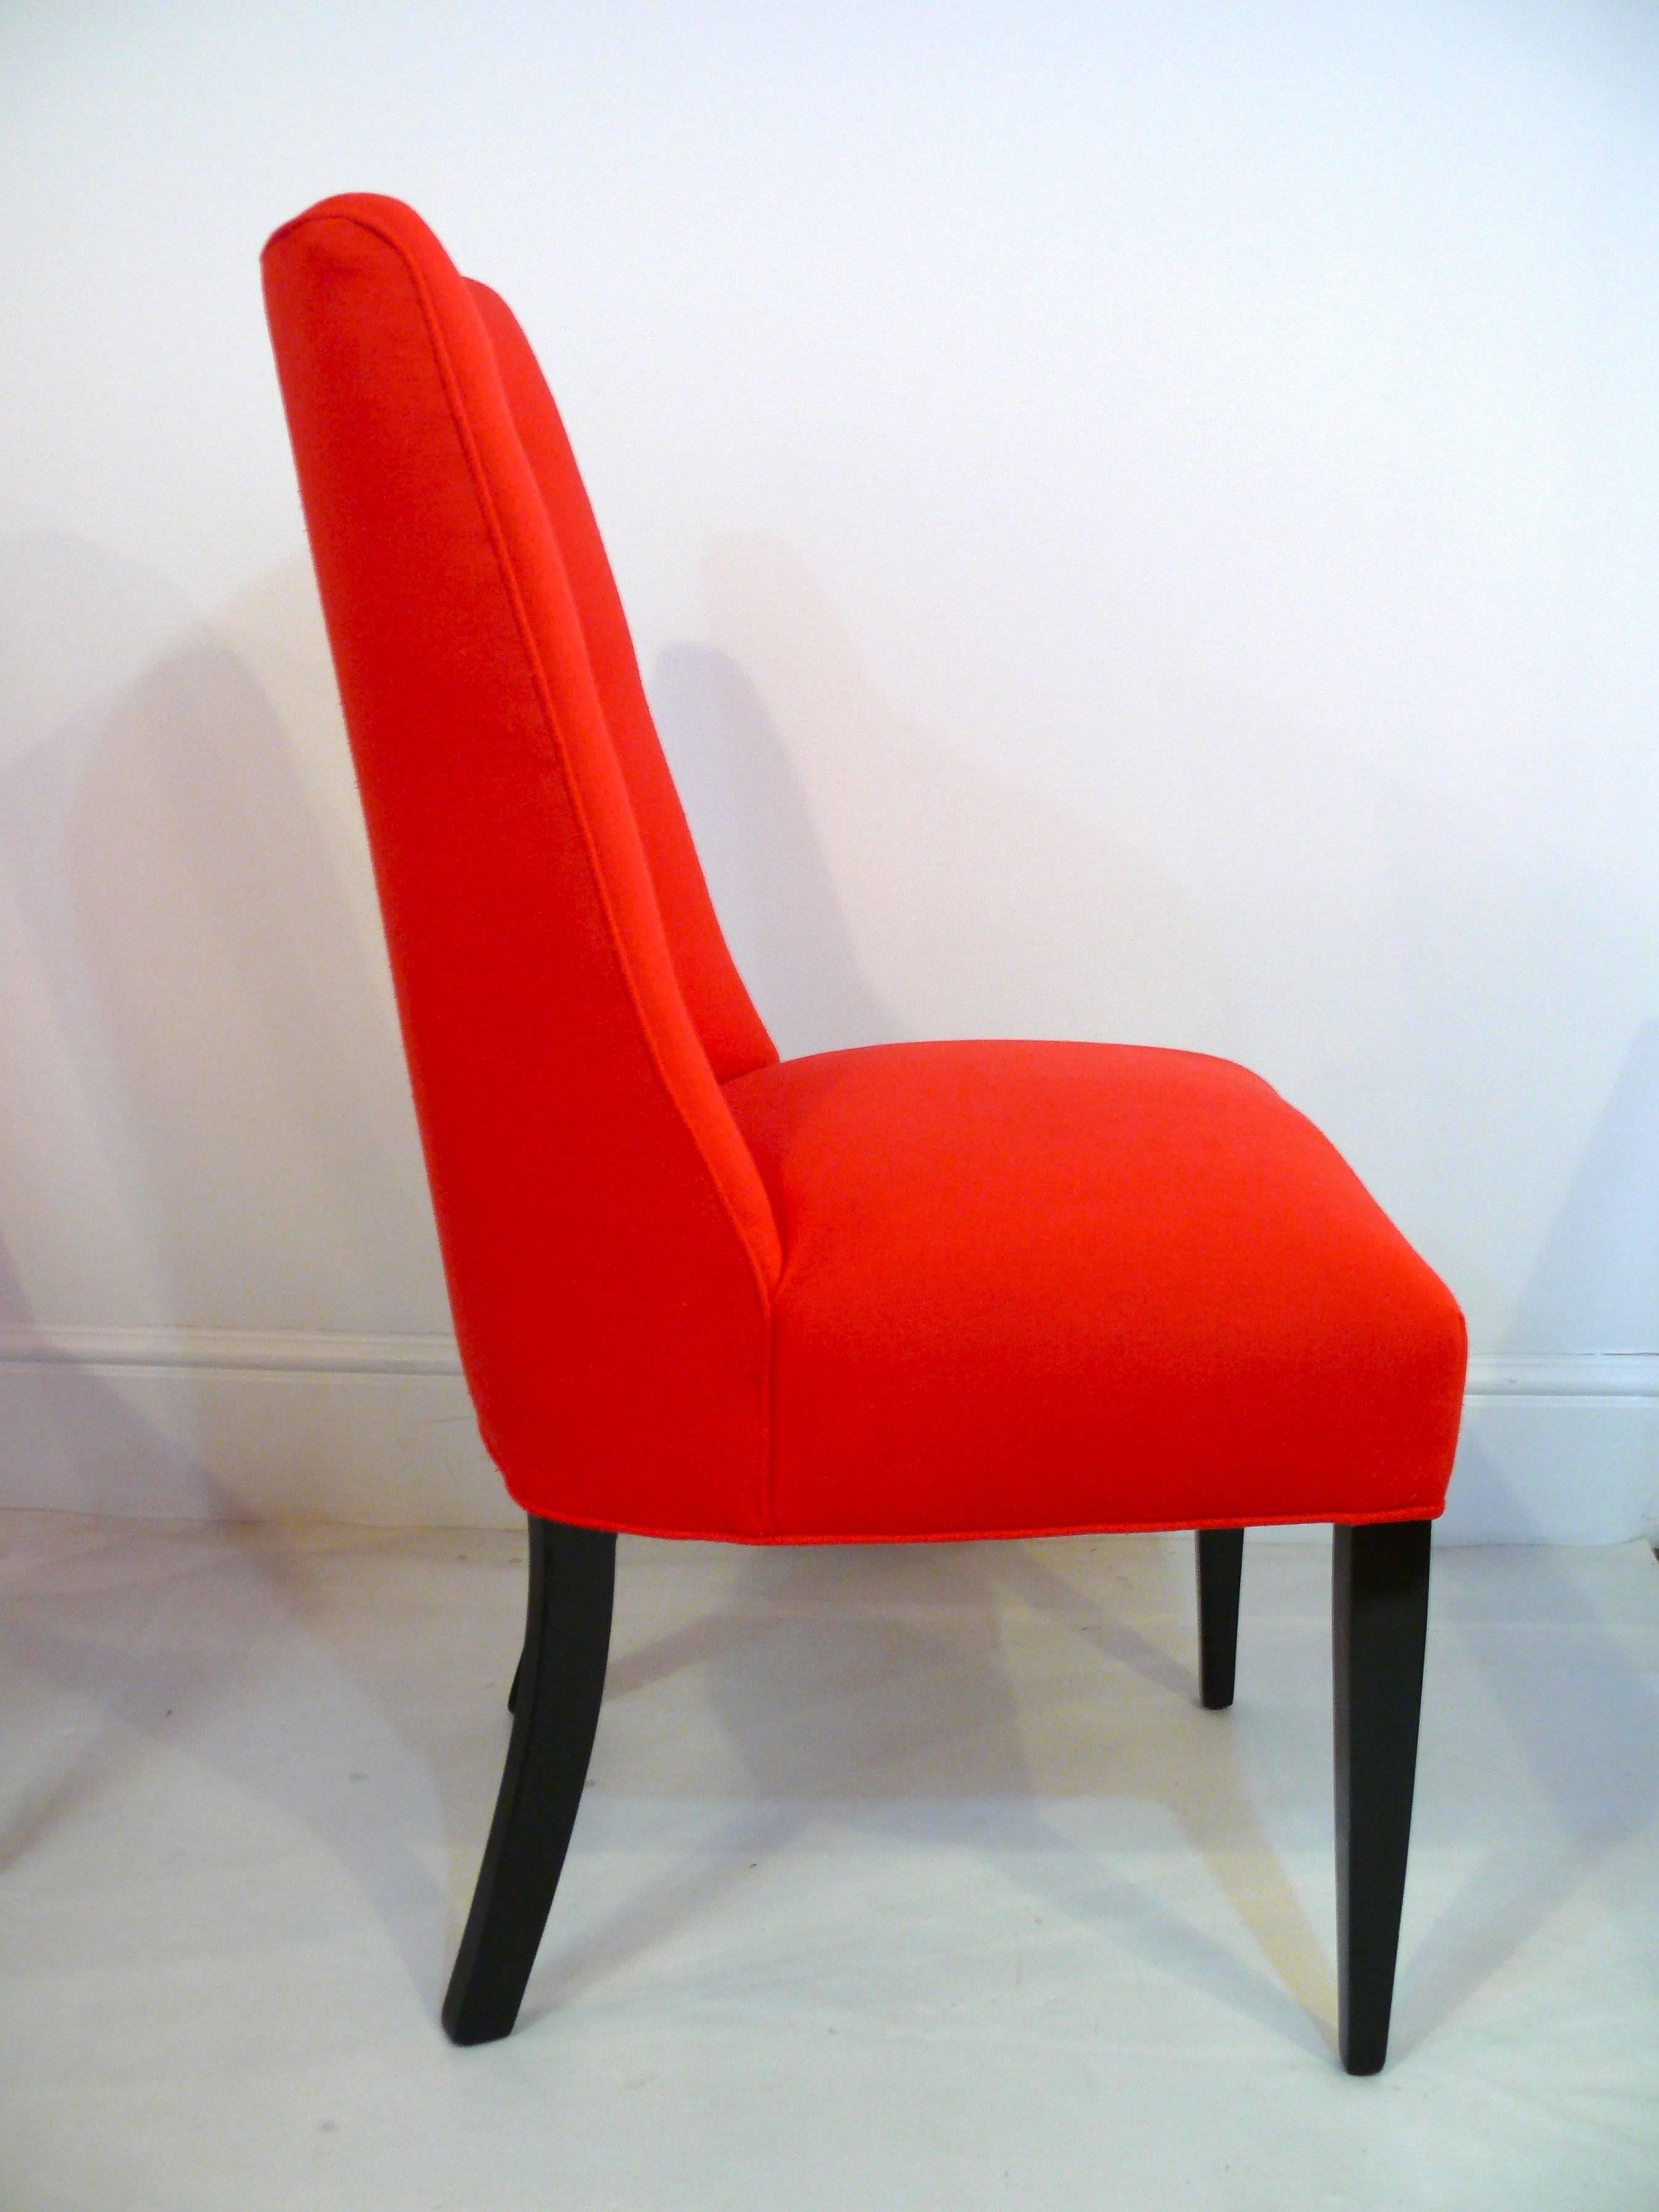 Ebonized Pair of Midcentury Poppy Red Button Back Chairs For Sale